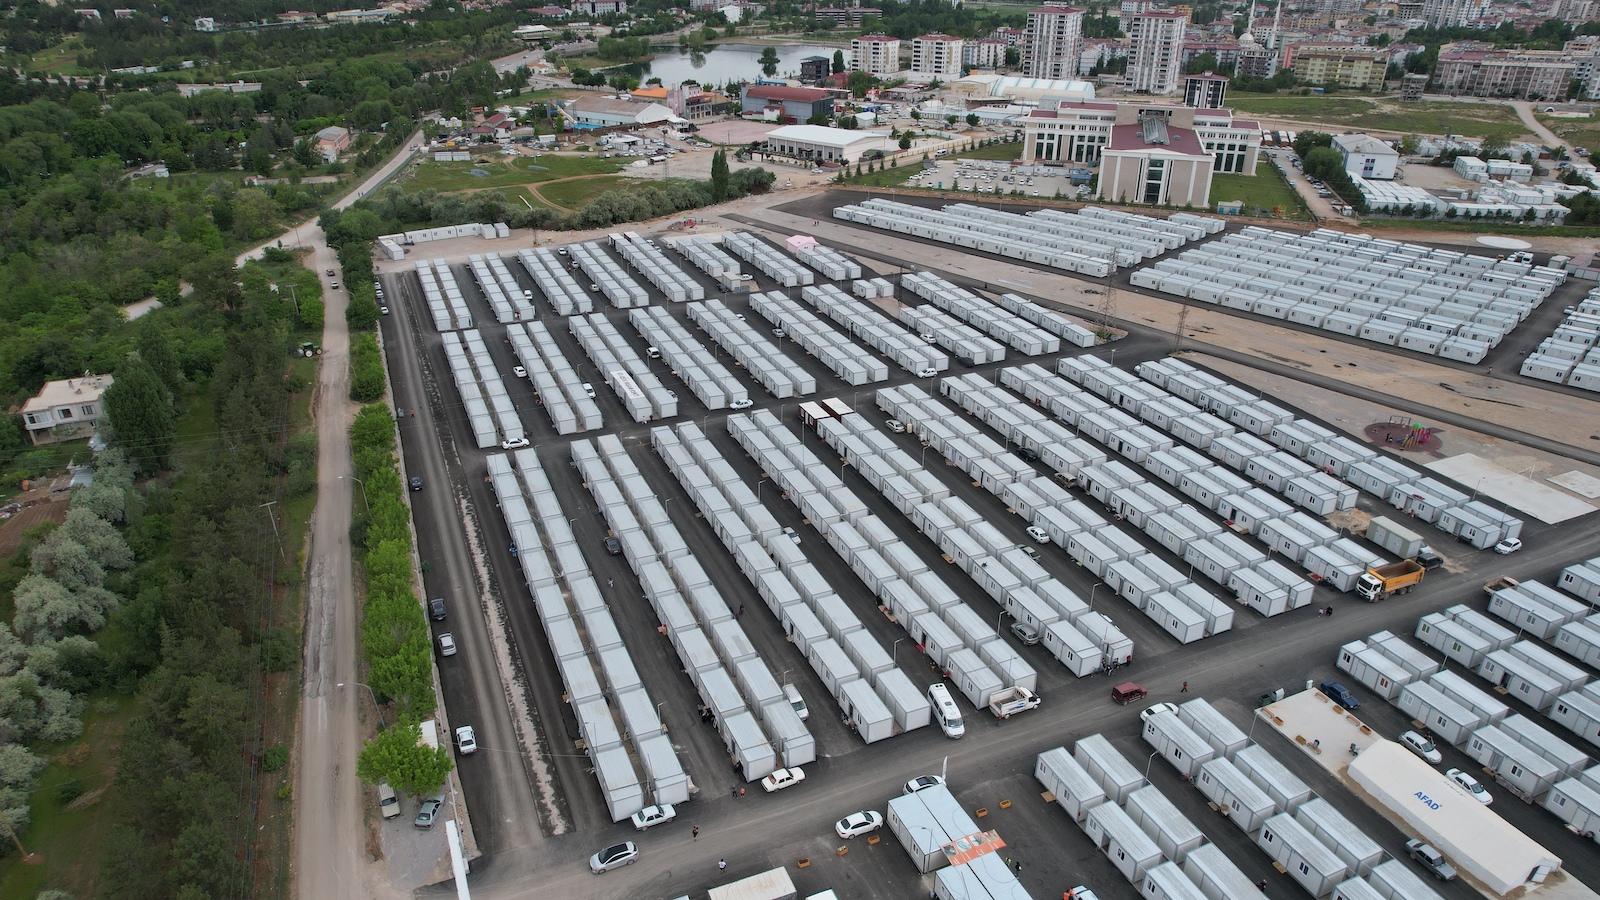 Orhan Güner: "Let's Build Container Neighborhoods and Transport Them to Where Needed"